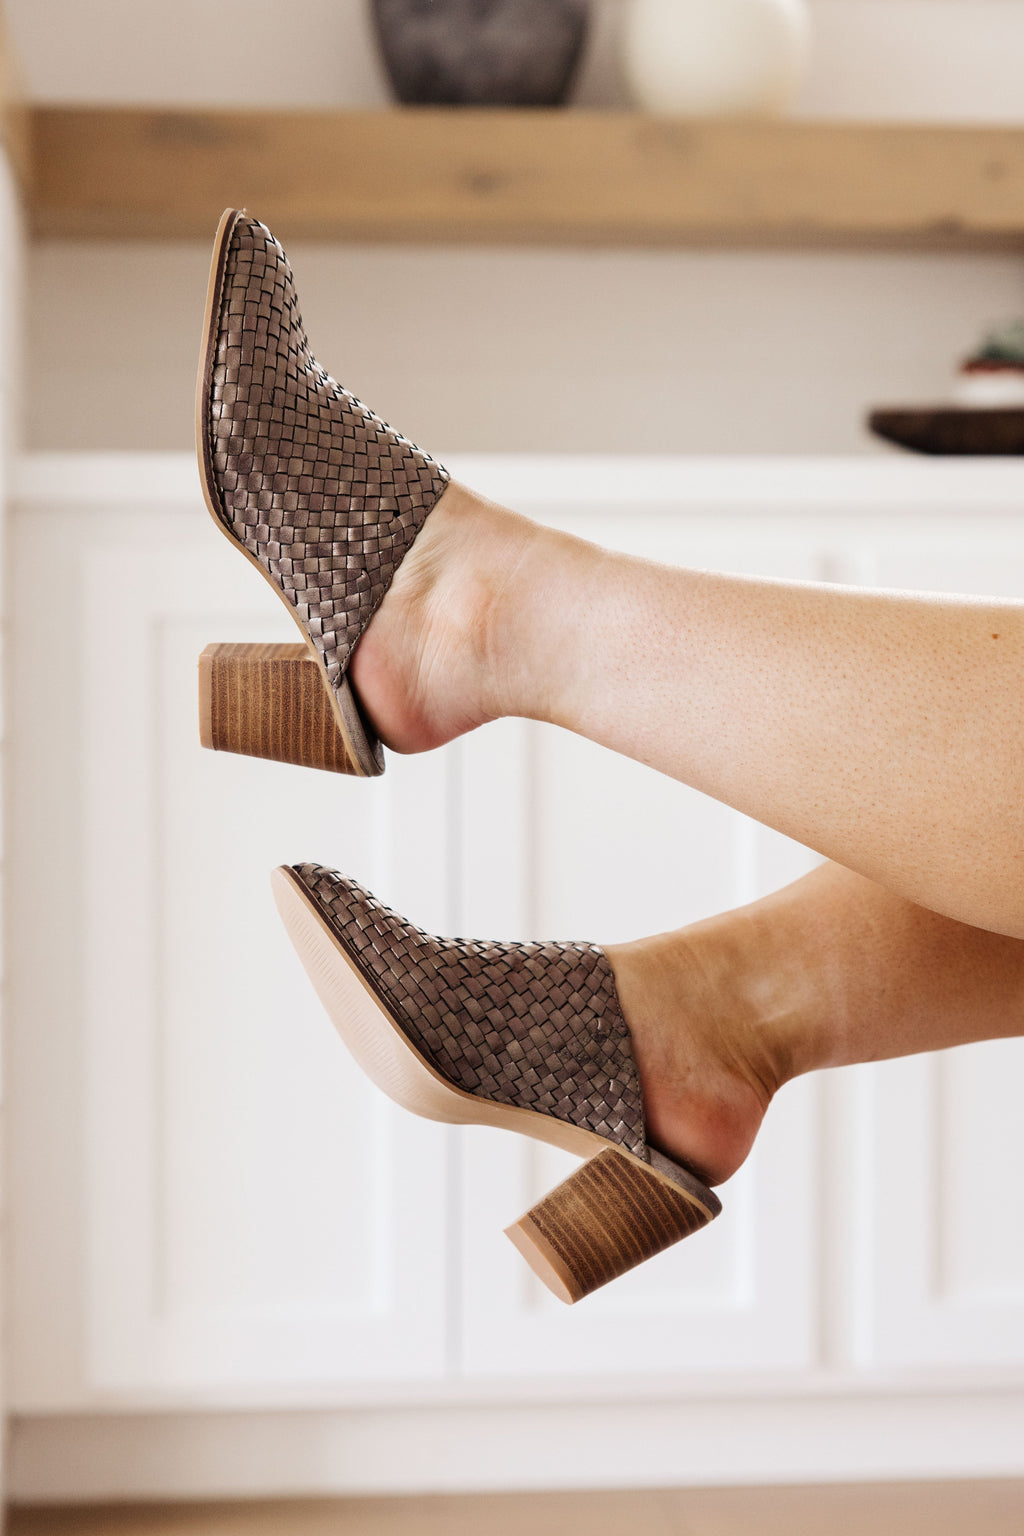 Walk With Me Woven Mules - OW *FINAL SALE*